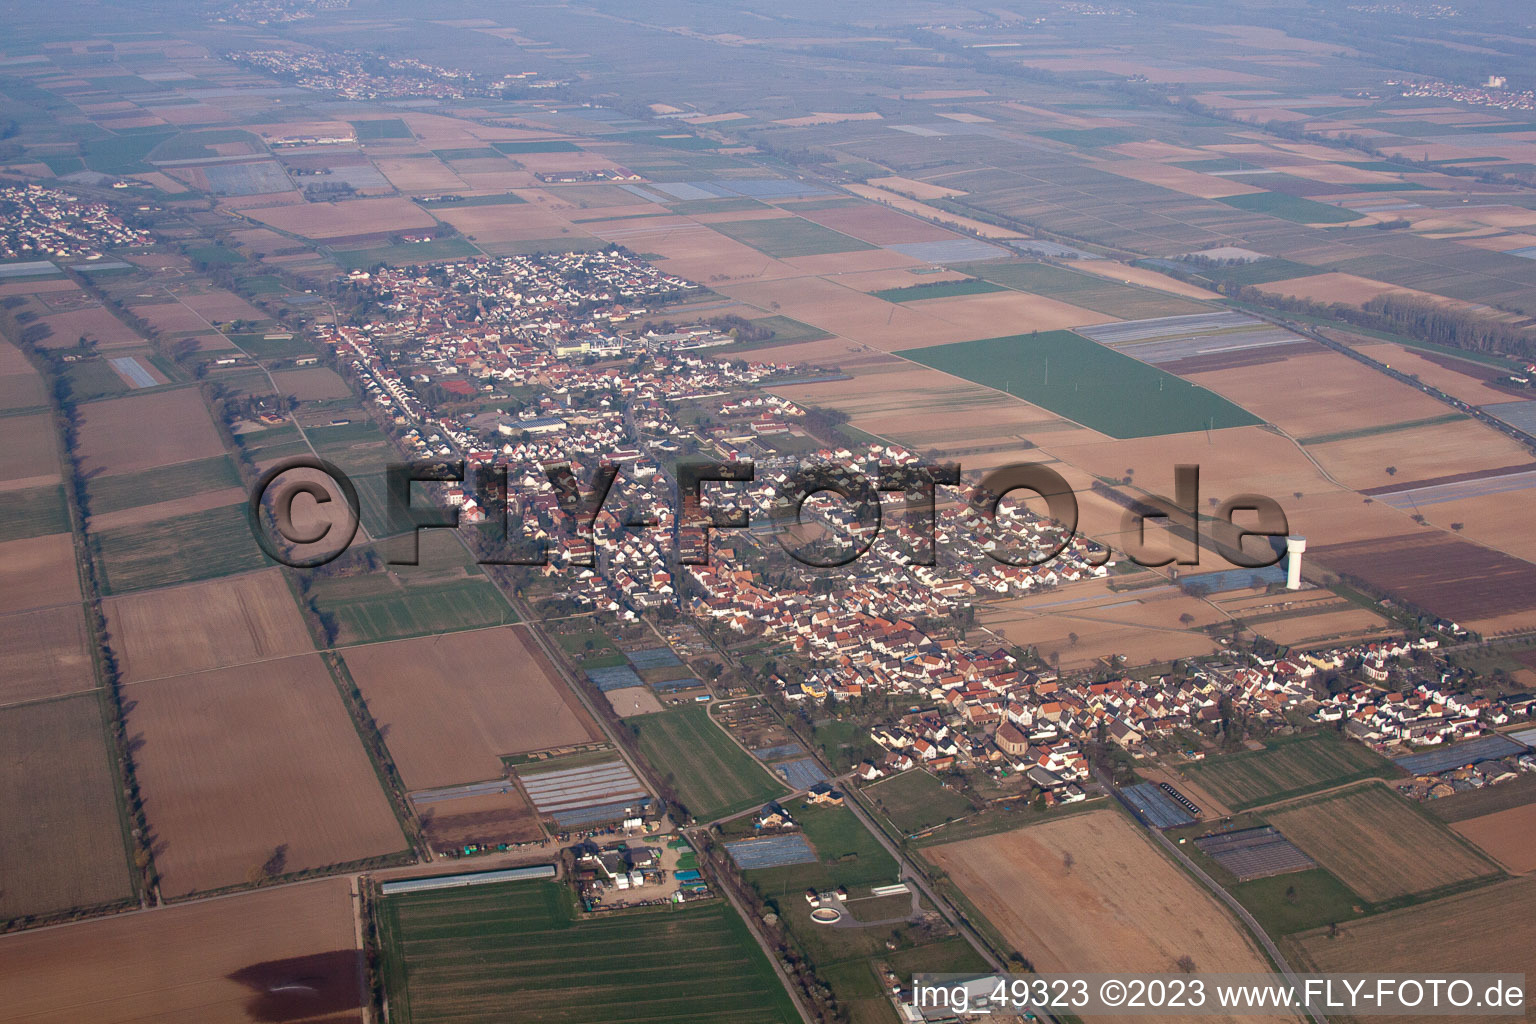 Lustadt in the state Rhineland-Palatinate, Germany from above